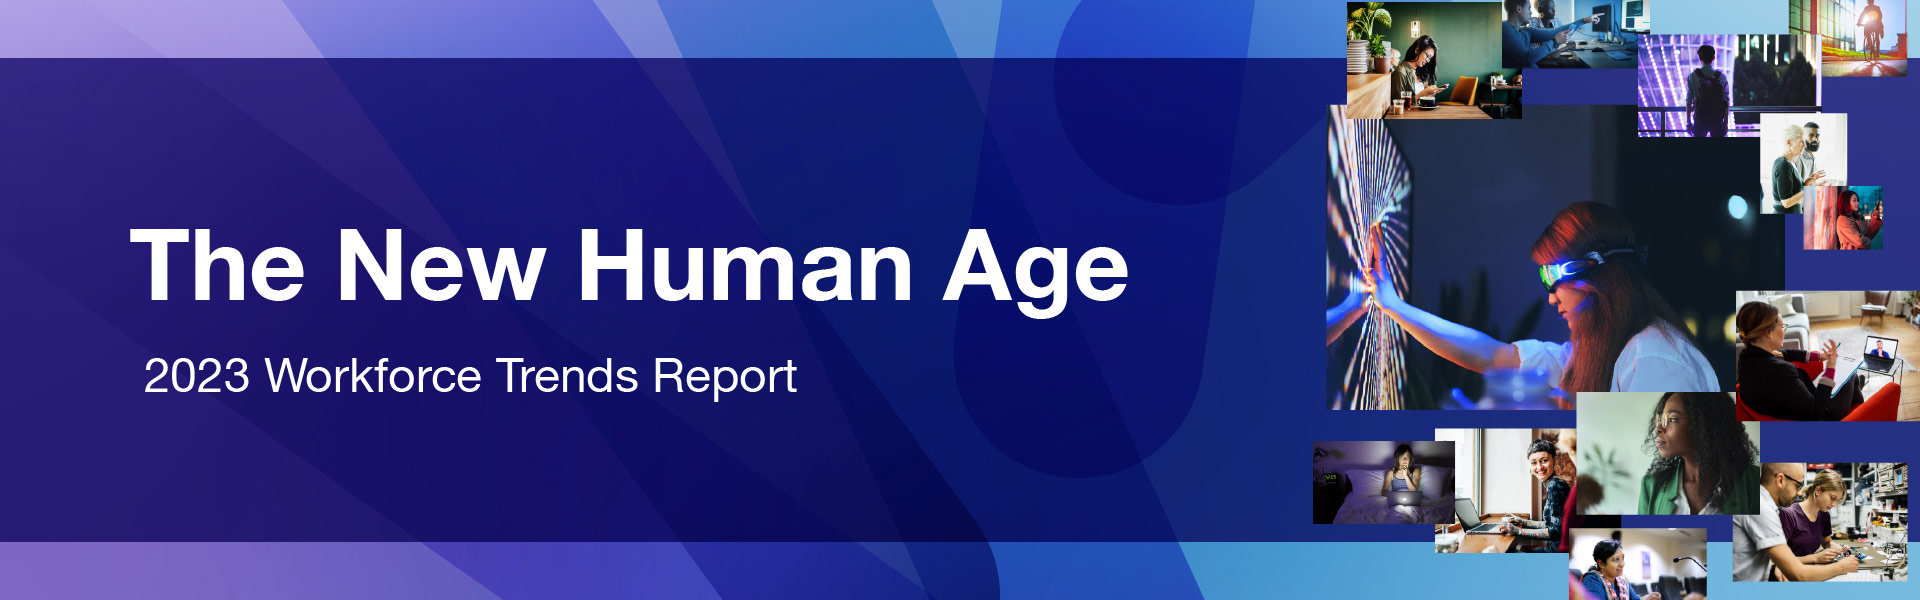 The New Human Age